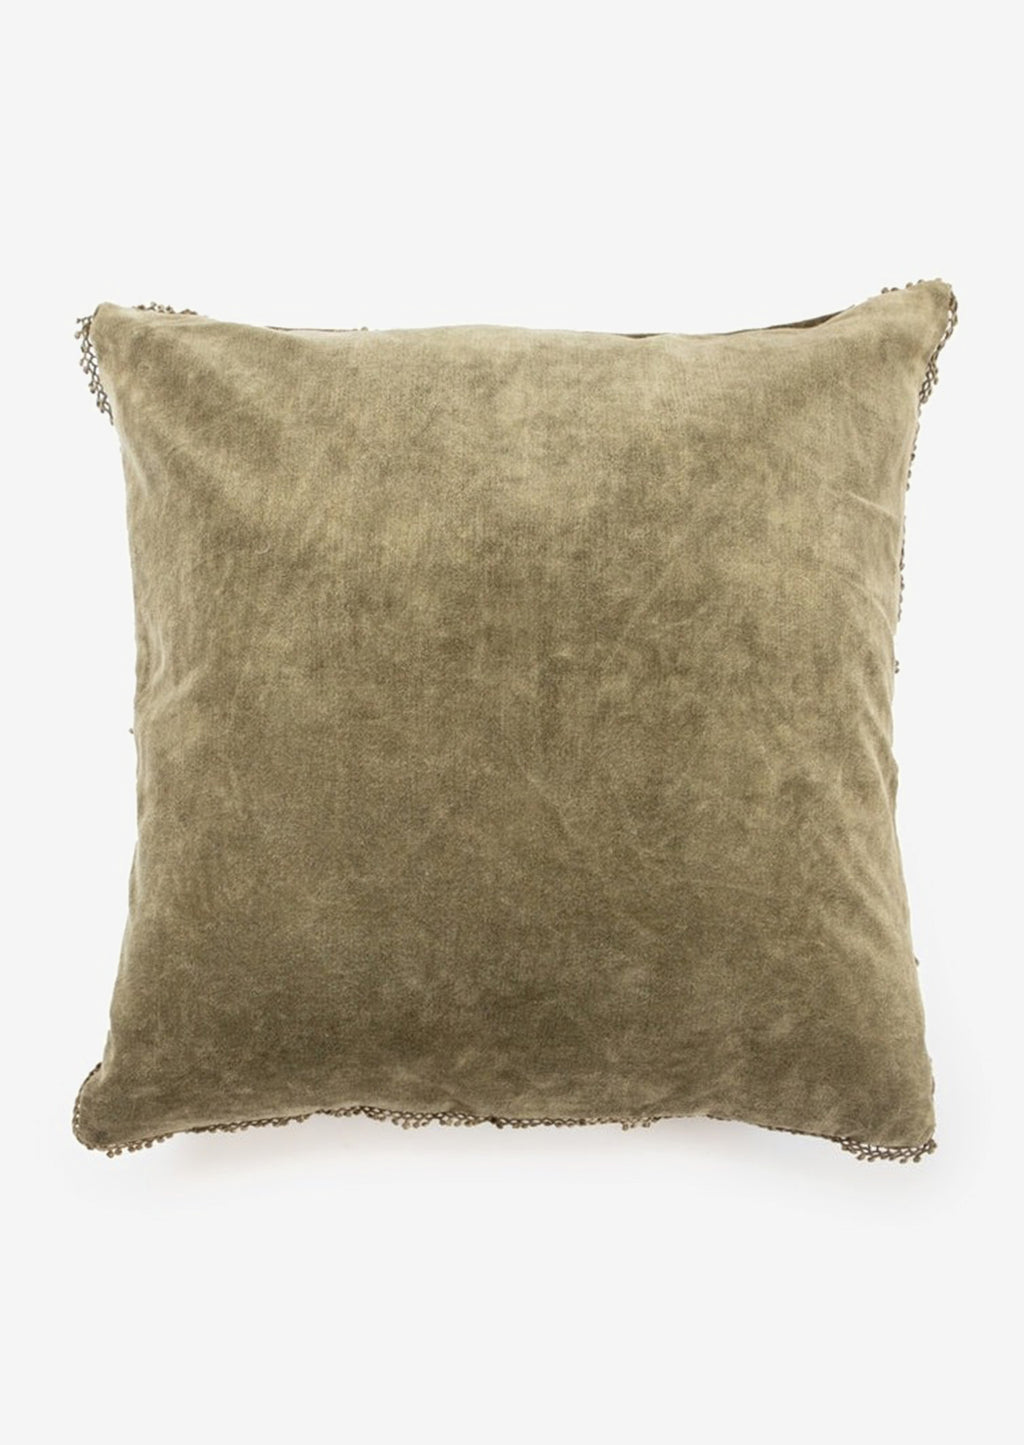 Olive: A velvet throw pillow with pom pom trim in olive color.